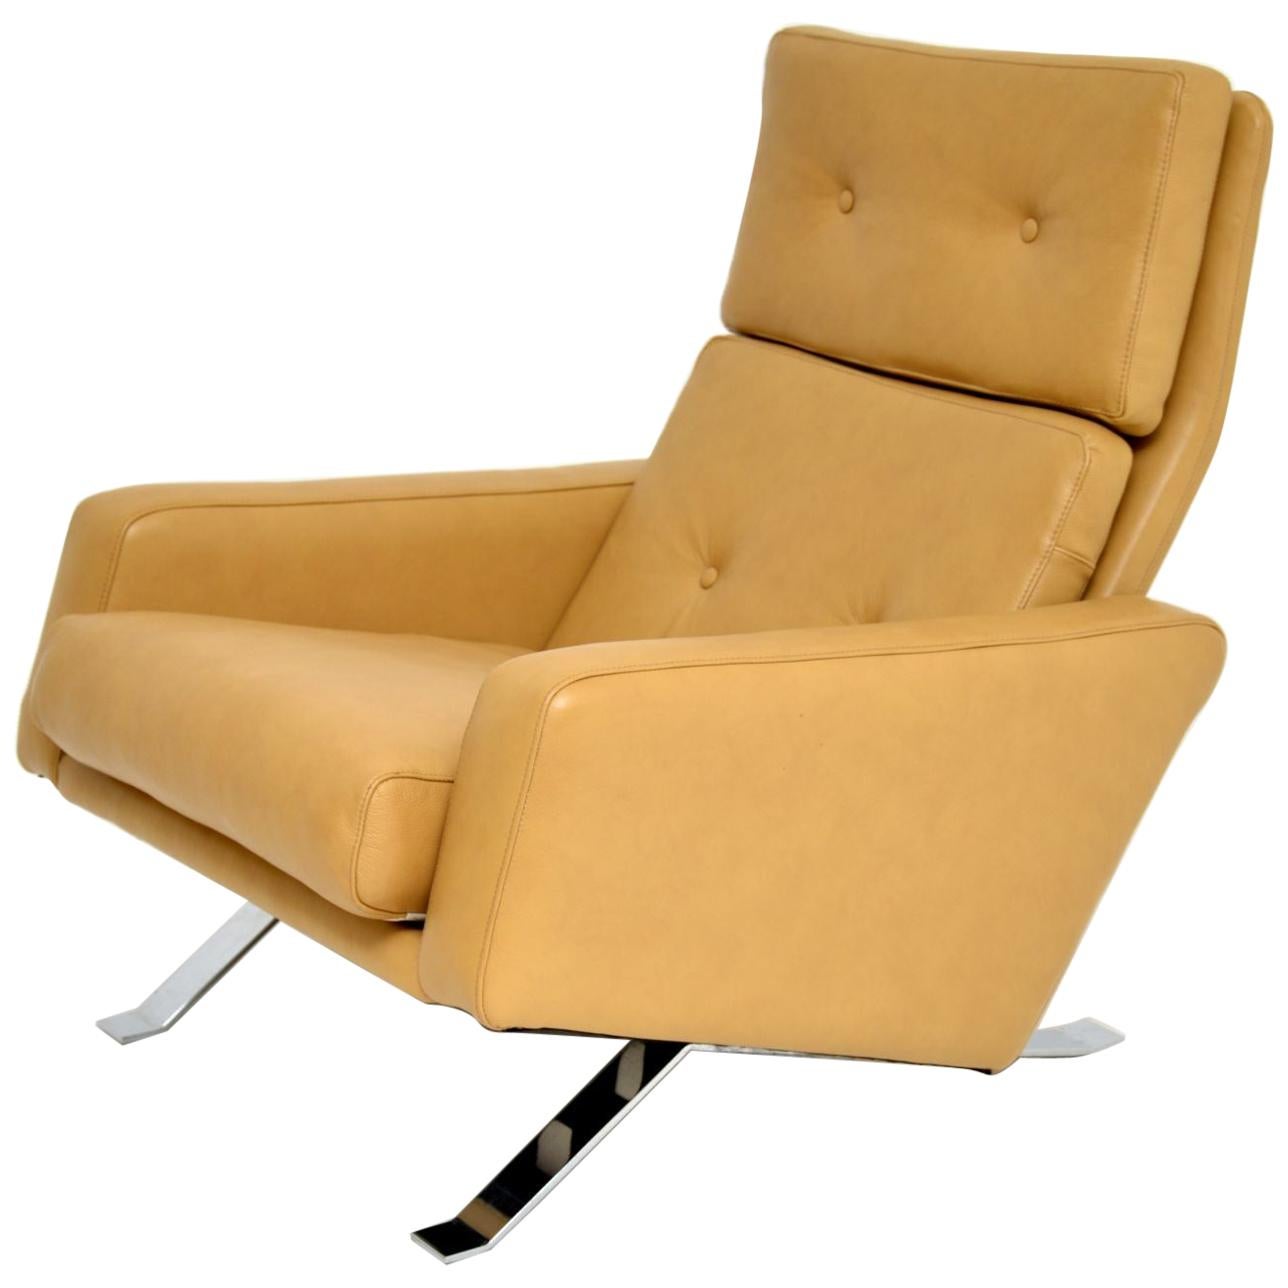 1960s Vintage Leather “Leo” Armchair by Robin Day for Hille